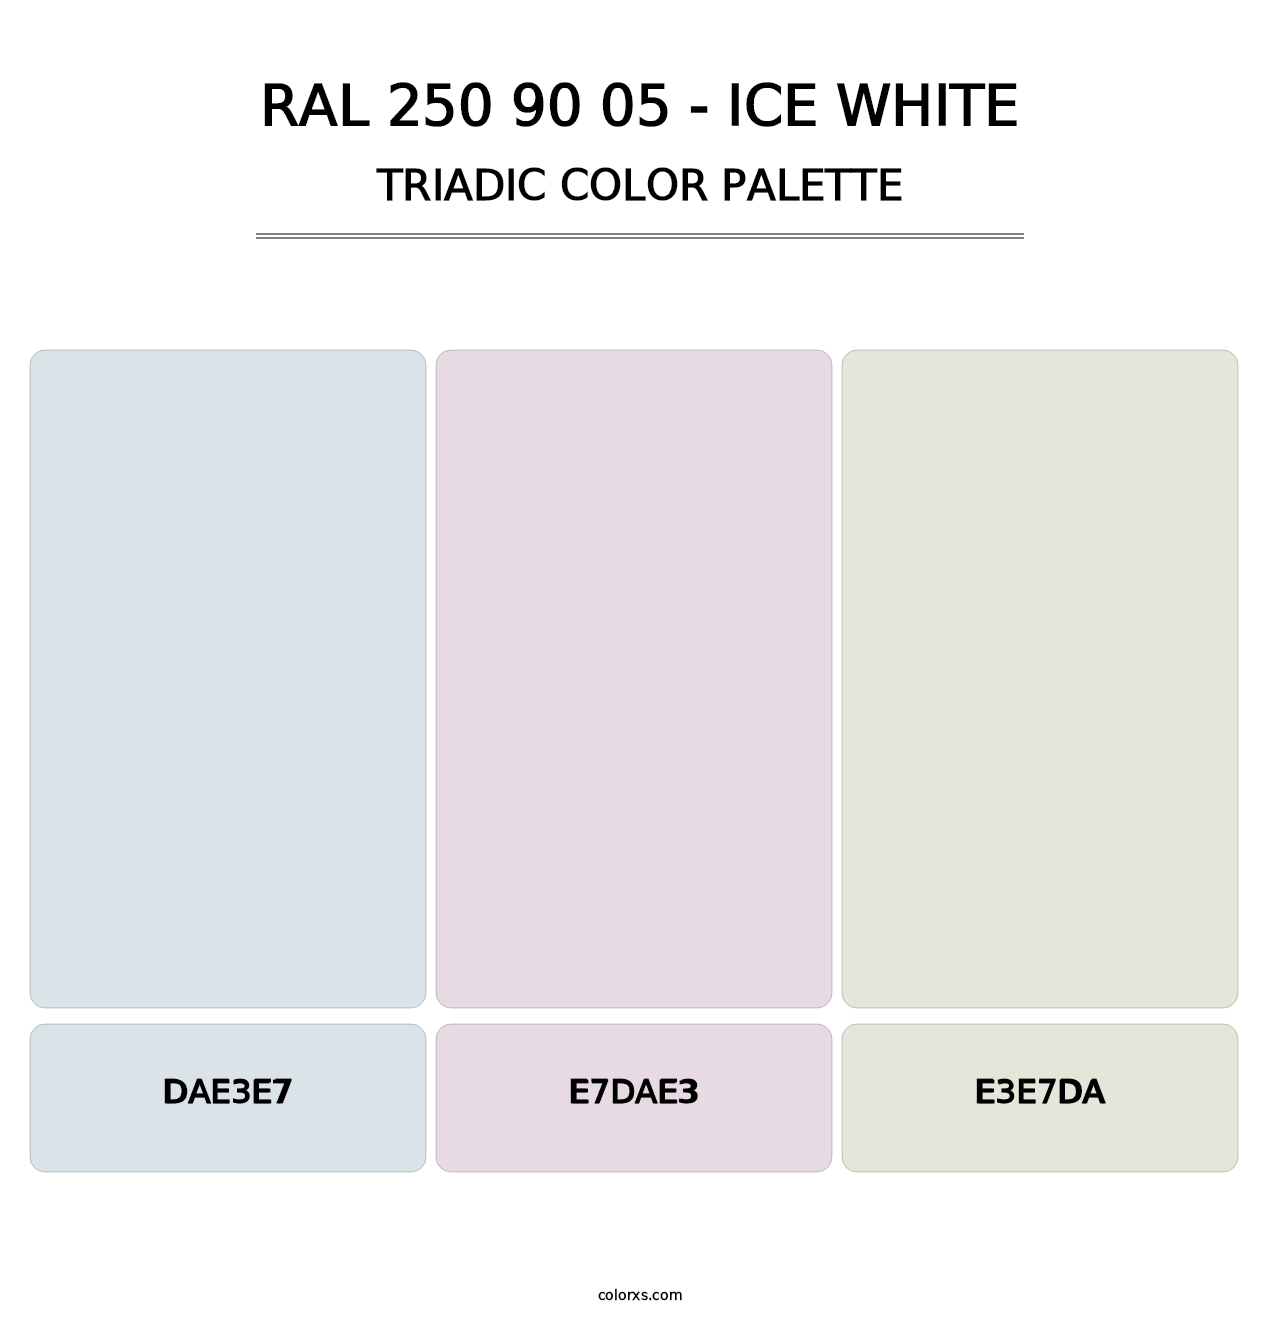 RAL 250 90 05 - Ice White - Triadic Color Palette